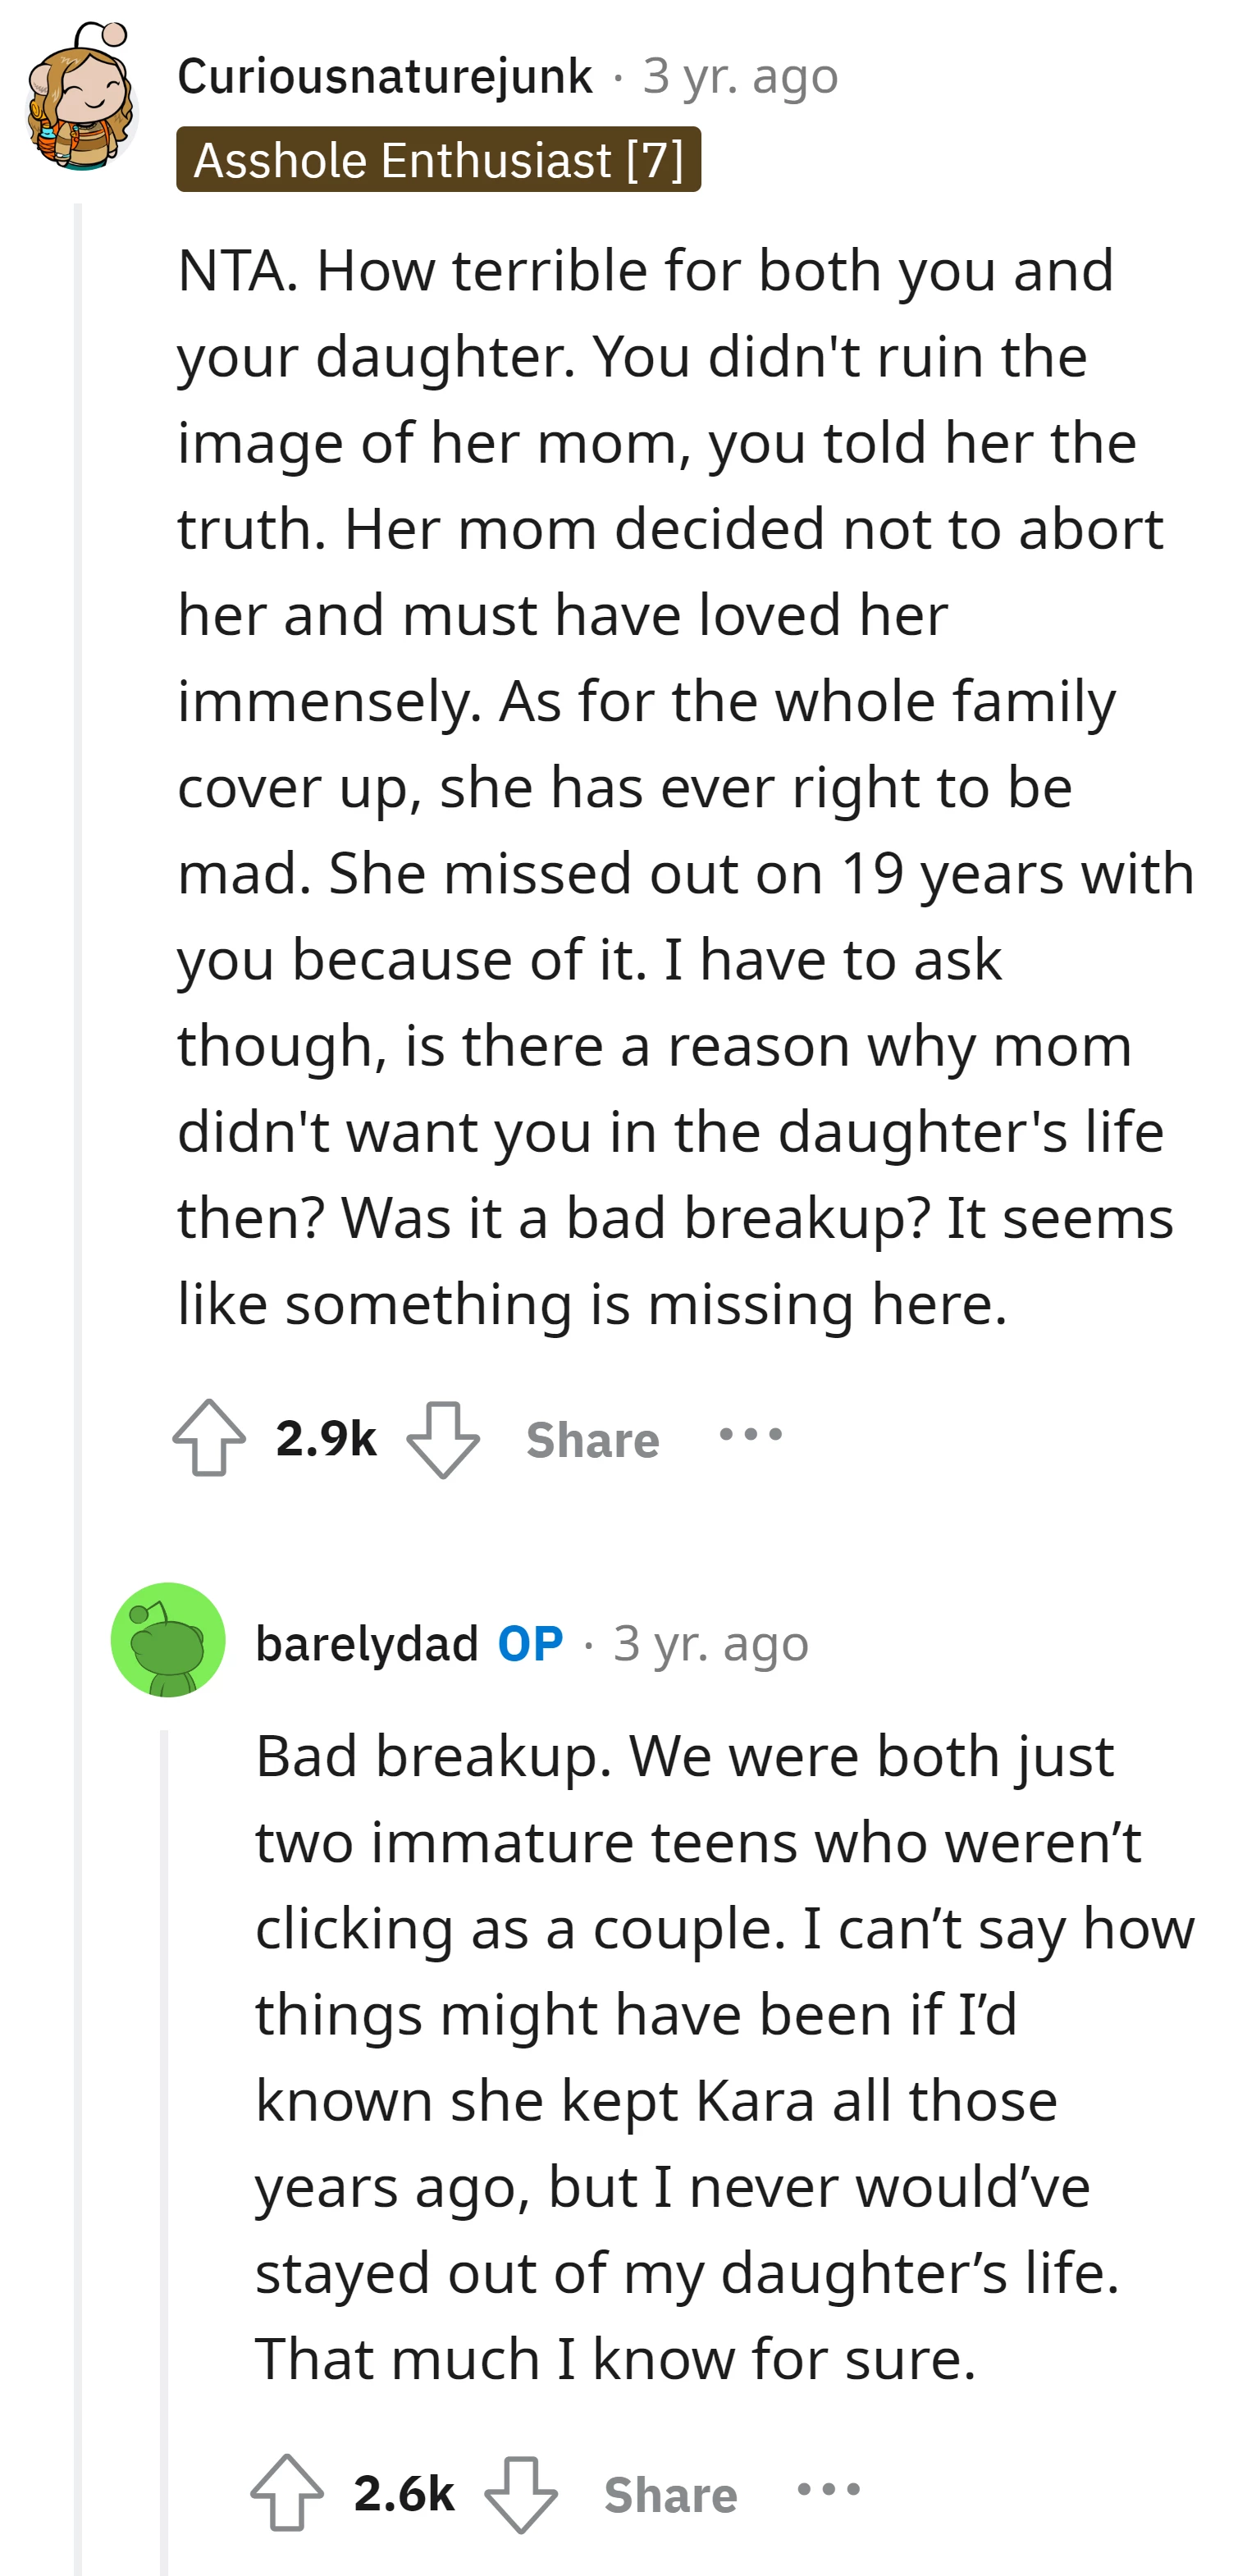 OP affirms that he would have been part of his daughter's life had he known about her